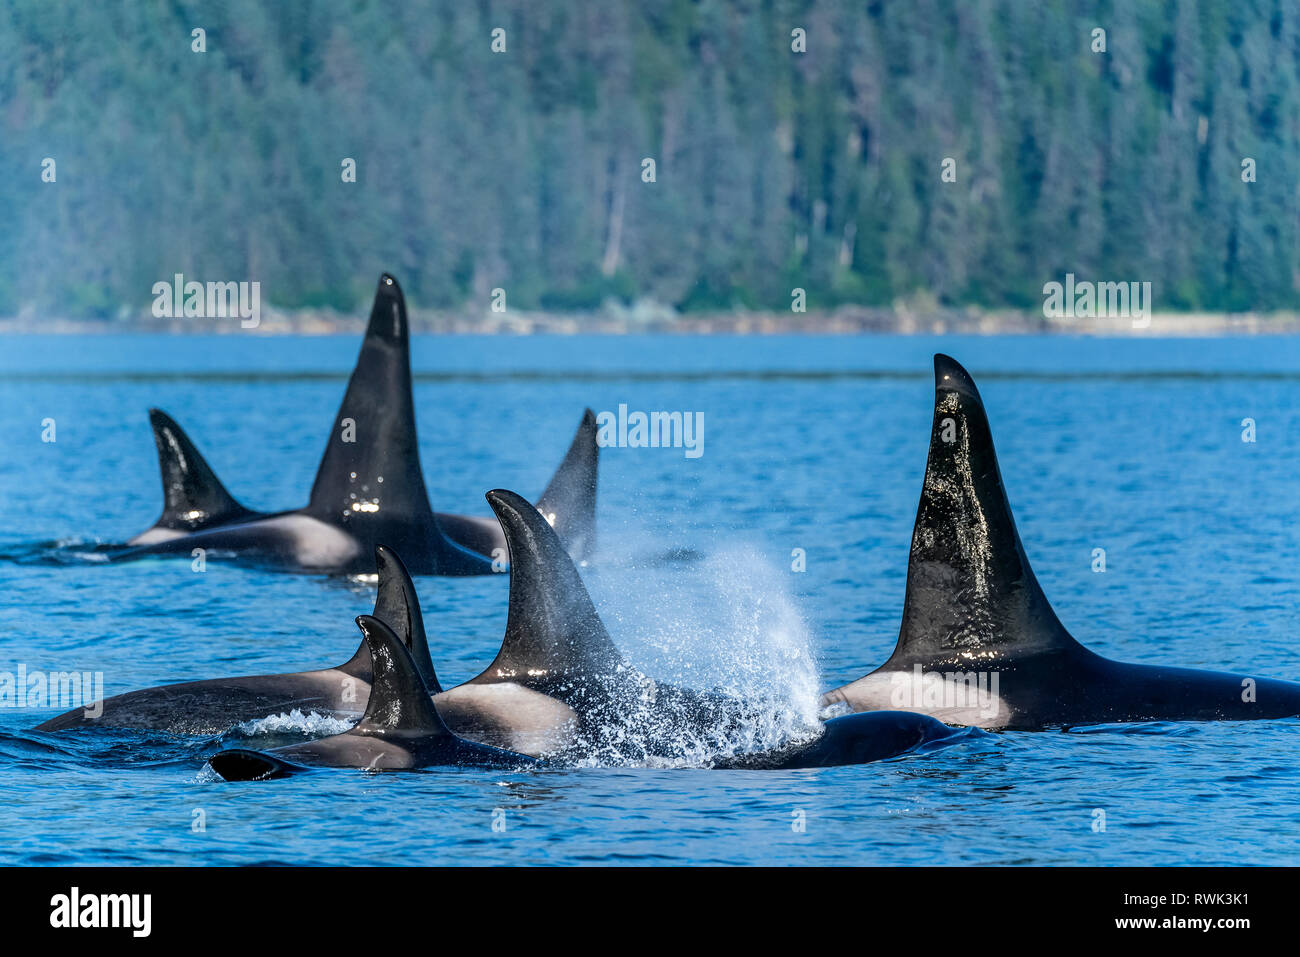 Orcas (Orcinus orca), also known as a Killer Whales, surface in Chatham Strait, Inside Passage; Alaska, United States of America Stock Photo